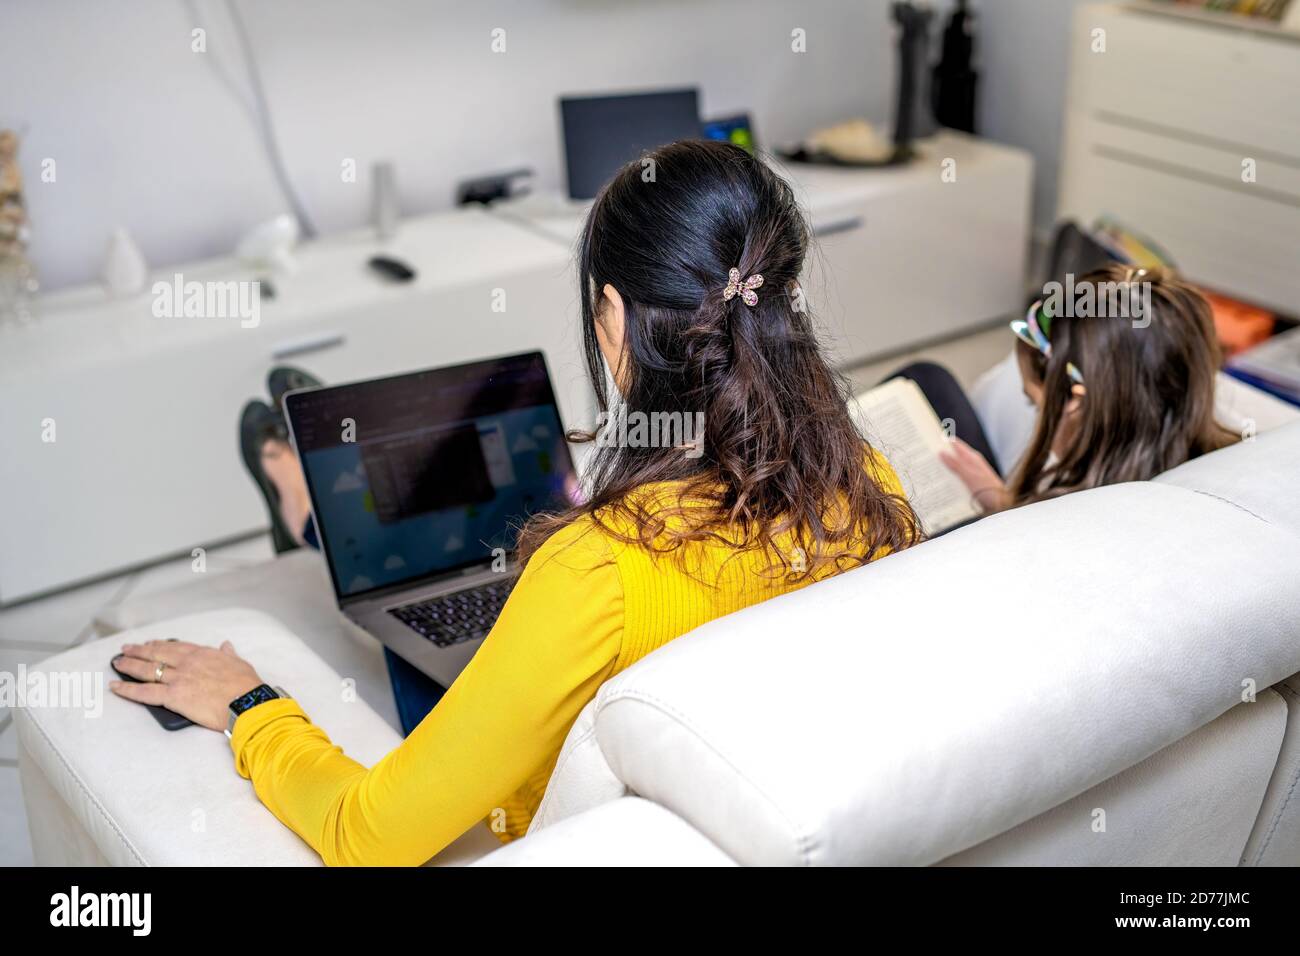 Woman with daugher working at home. Smartworking in covid-19 times. Stock Photo